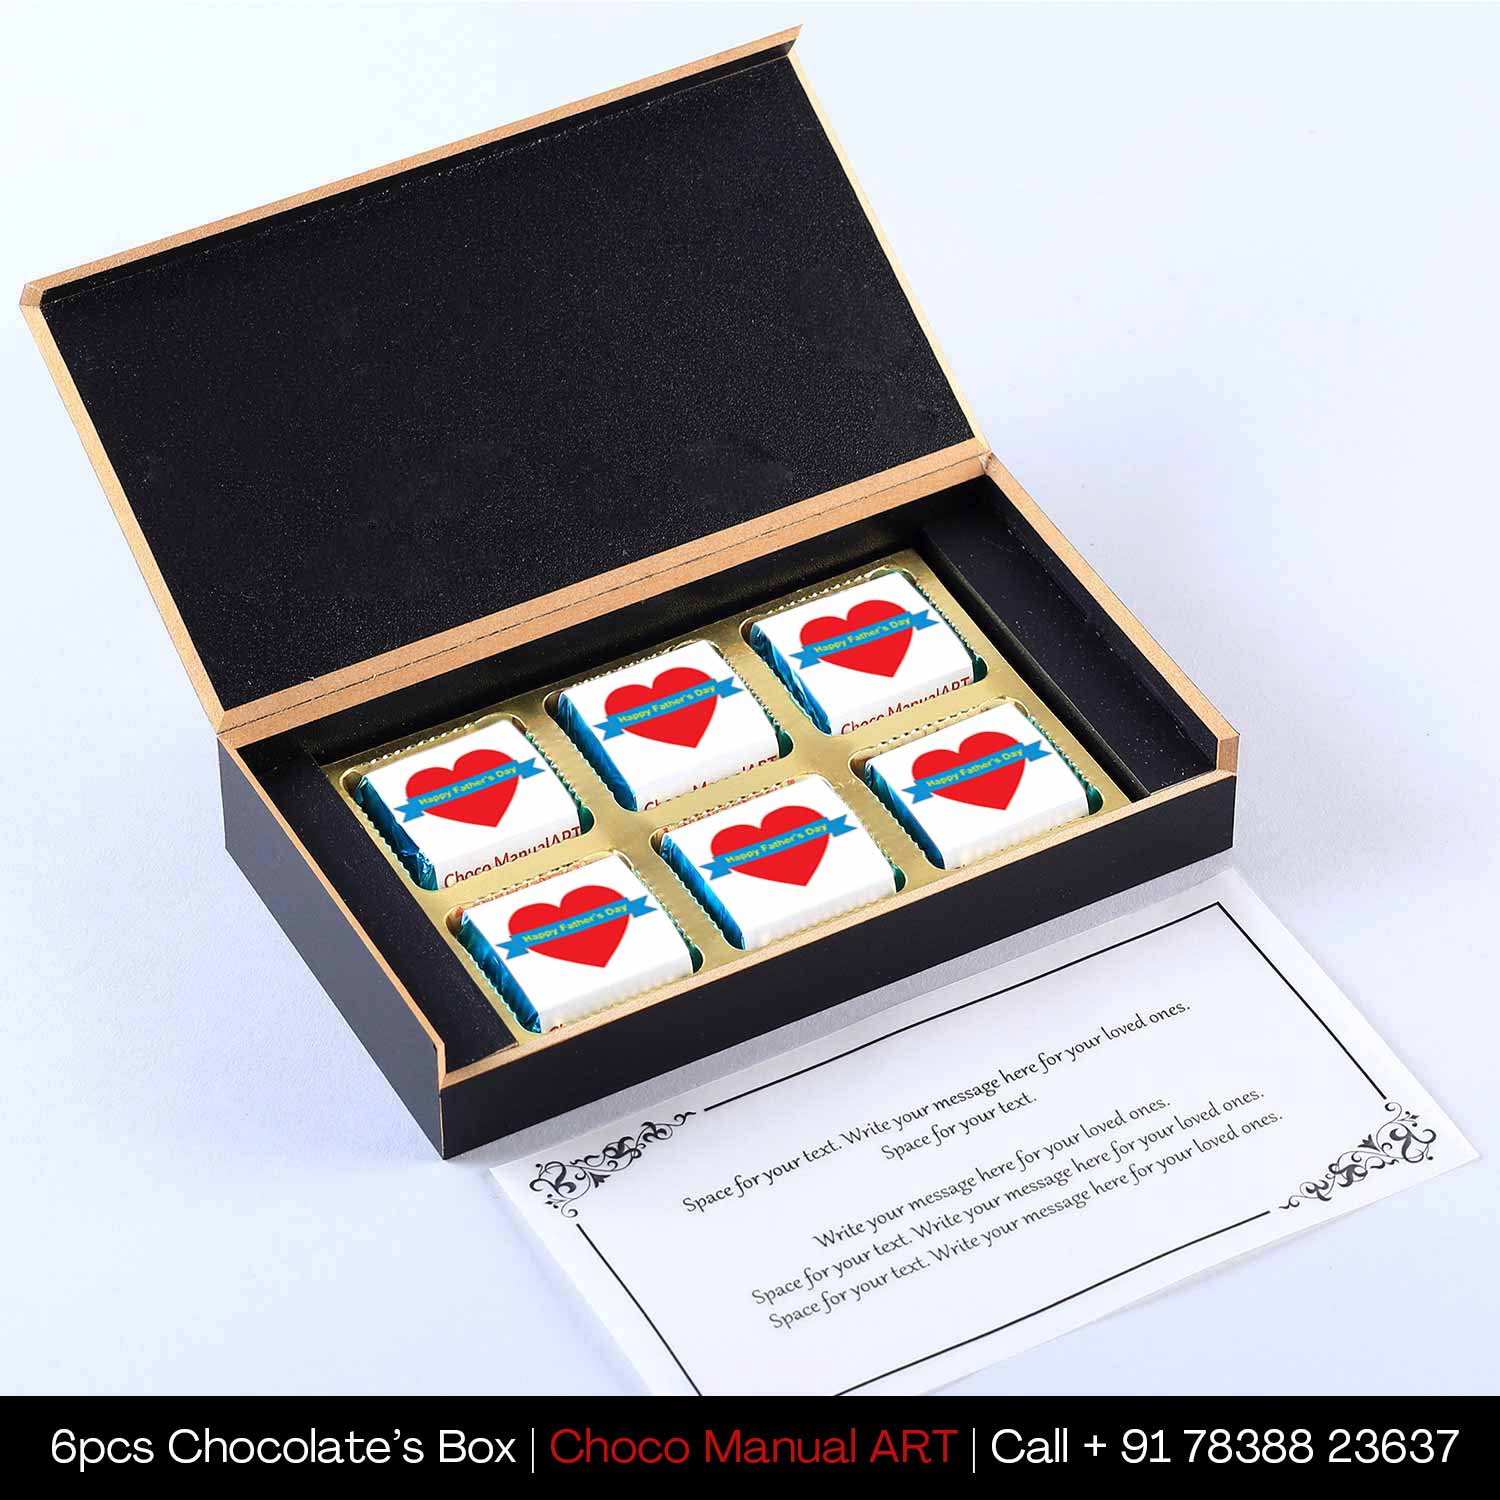 Red heart Happy Father's Day Printed wrapped Chocolates